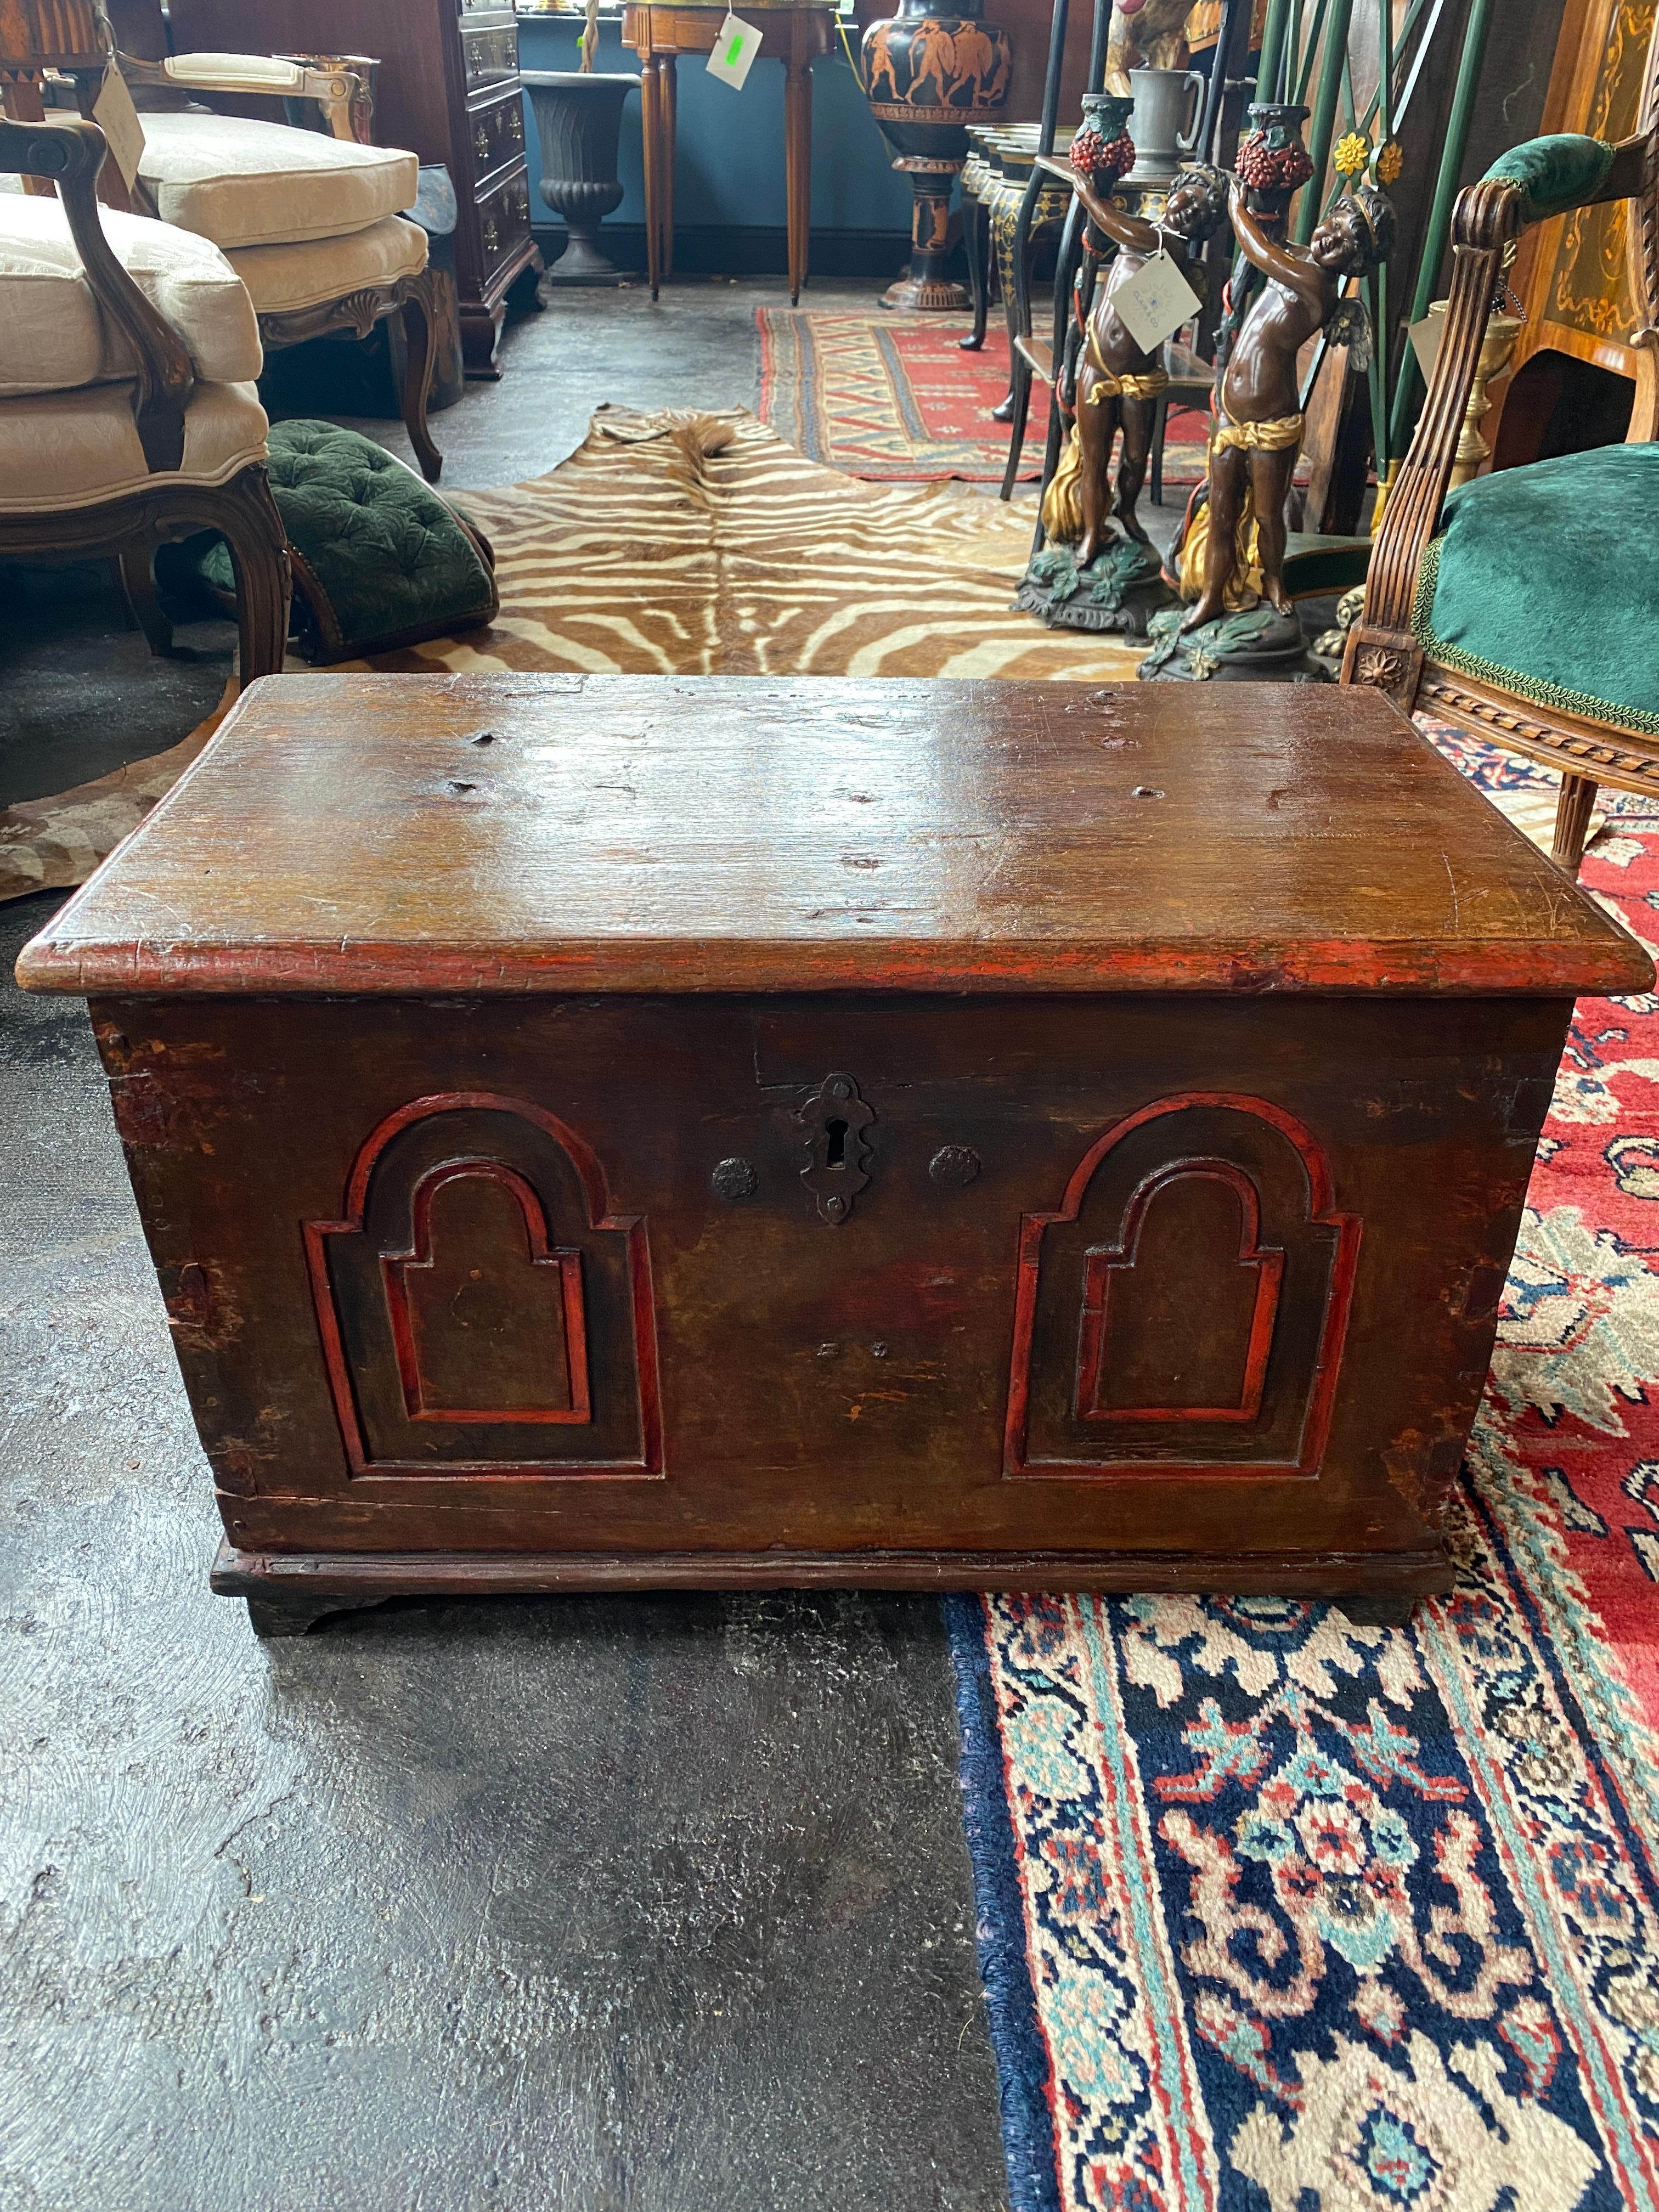 This is a handsome 18th century Continental trunk. This one is smaller in size. Some repairs are evident. The right side handle is not original. Warm patina on the surfaces. 

Measures: 24